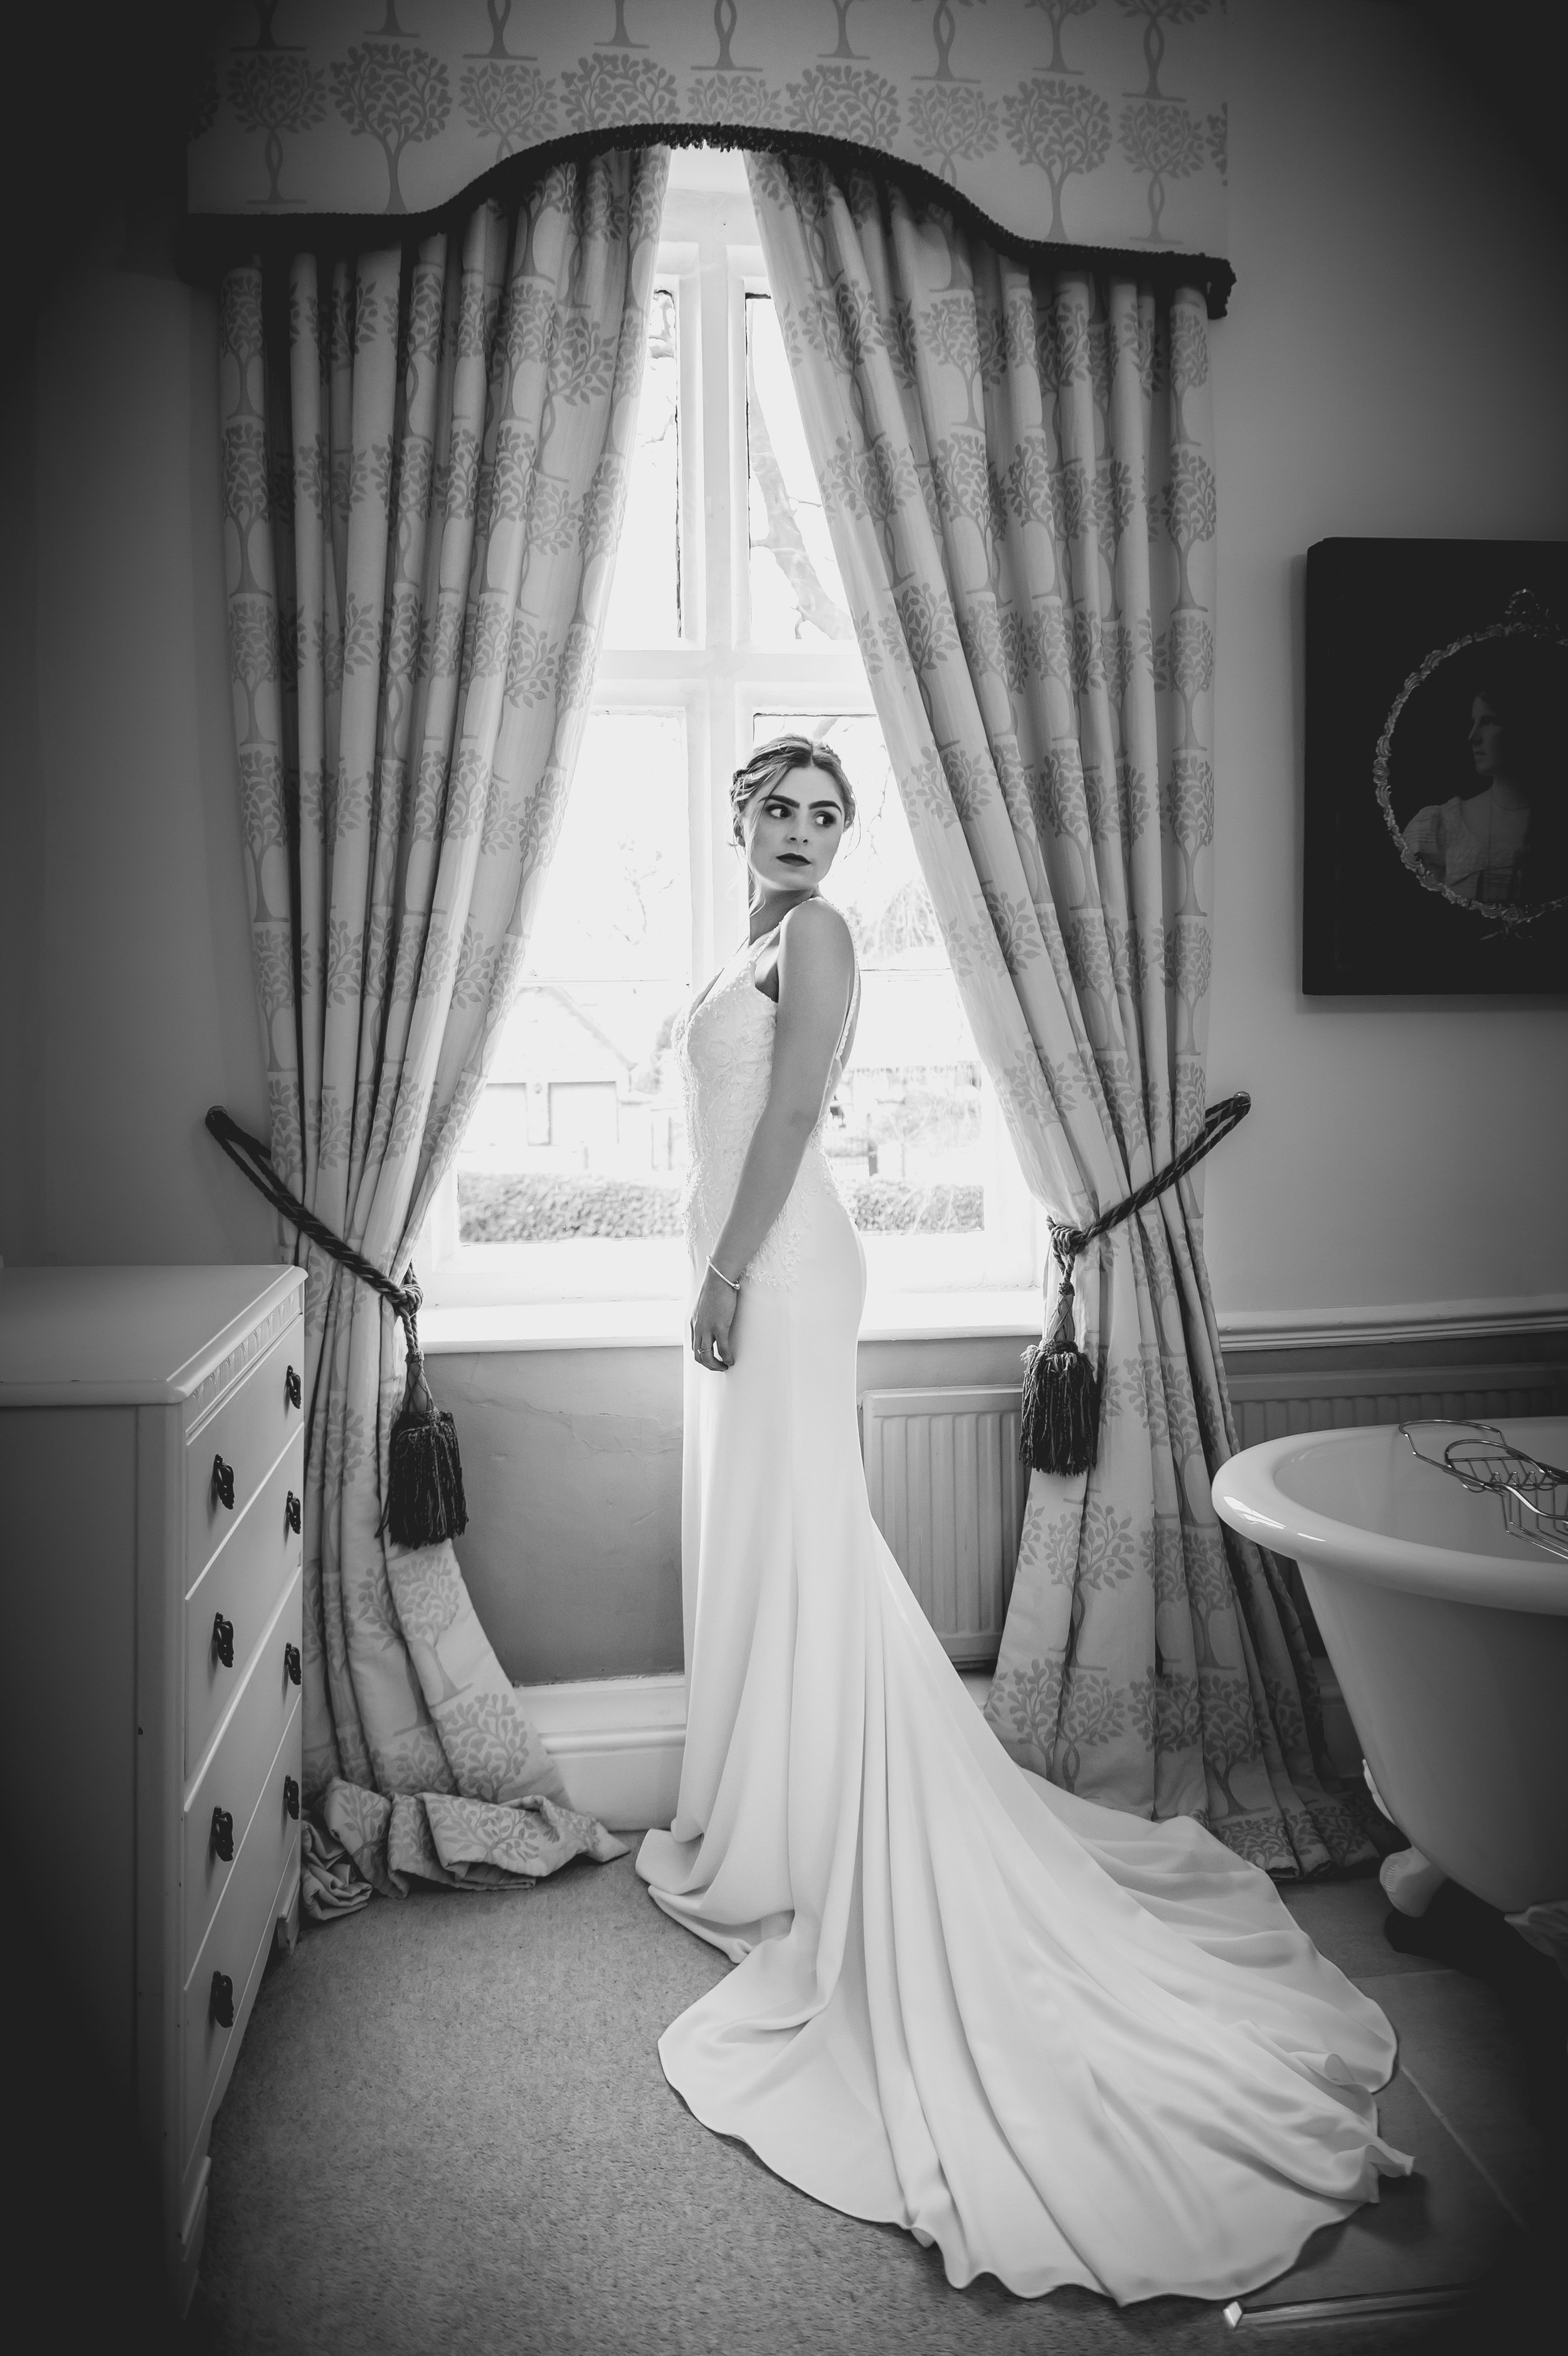 A stunning period wedding venue that offers affordable and bespoke ...